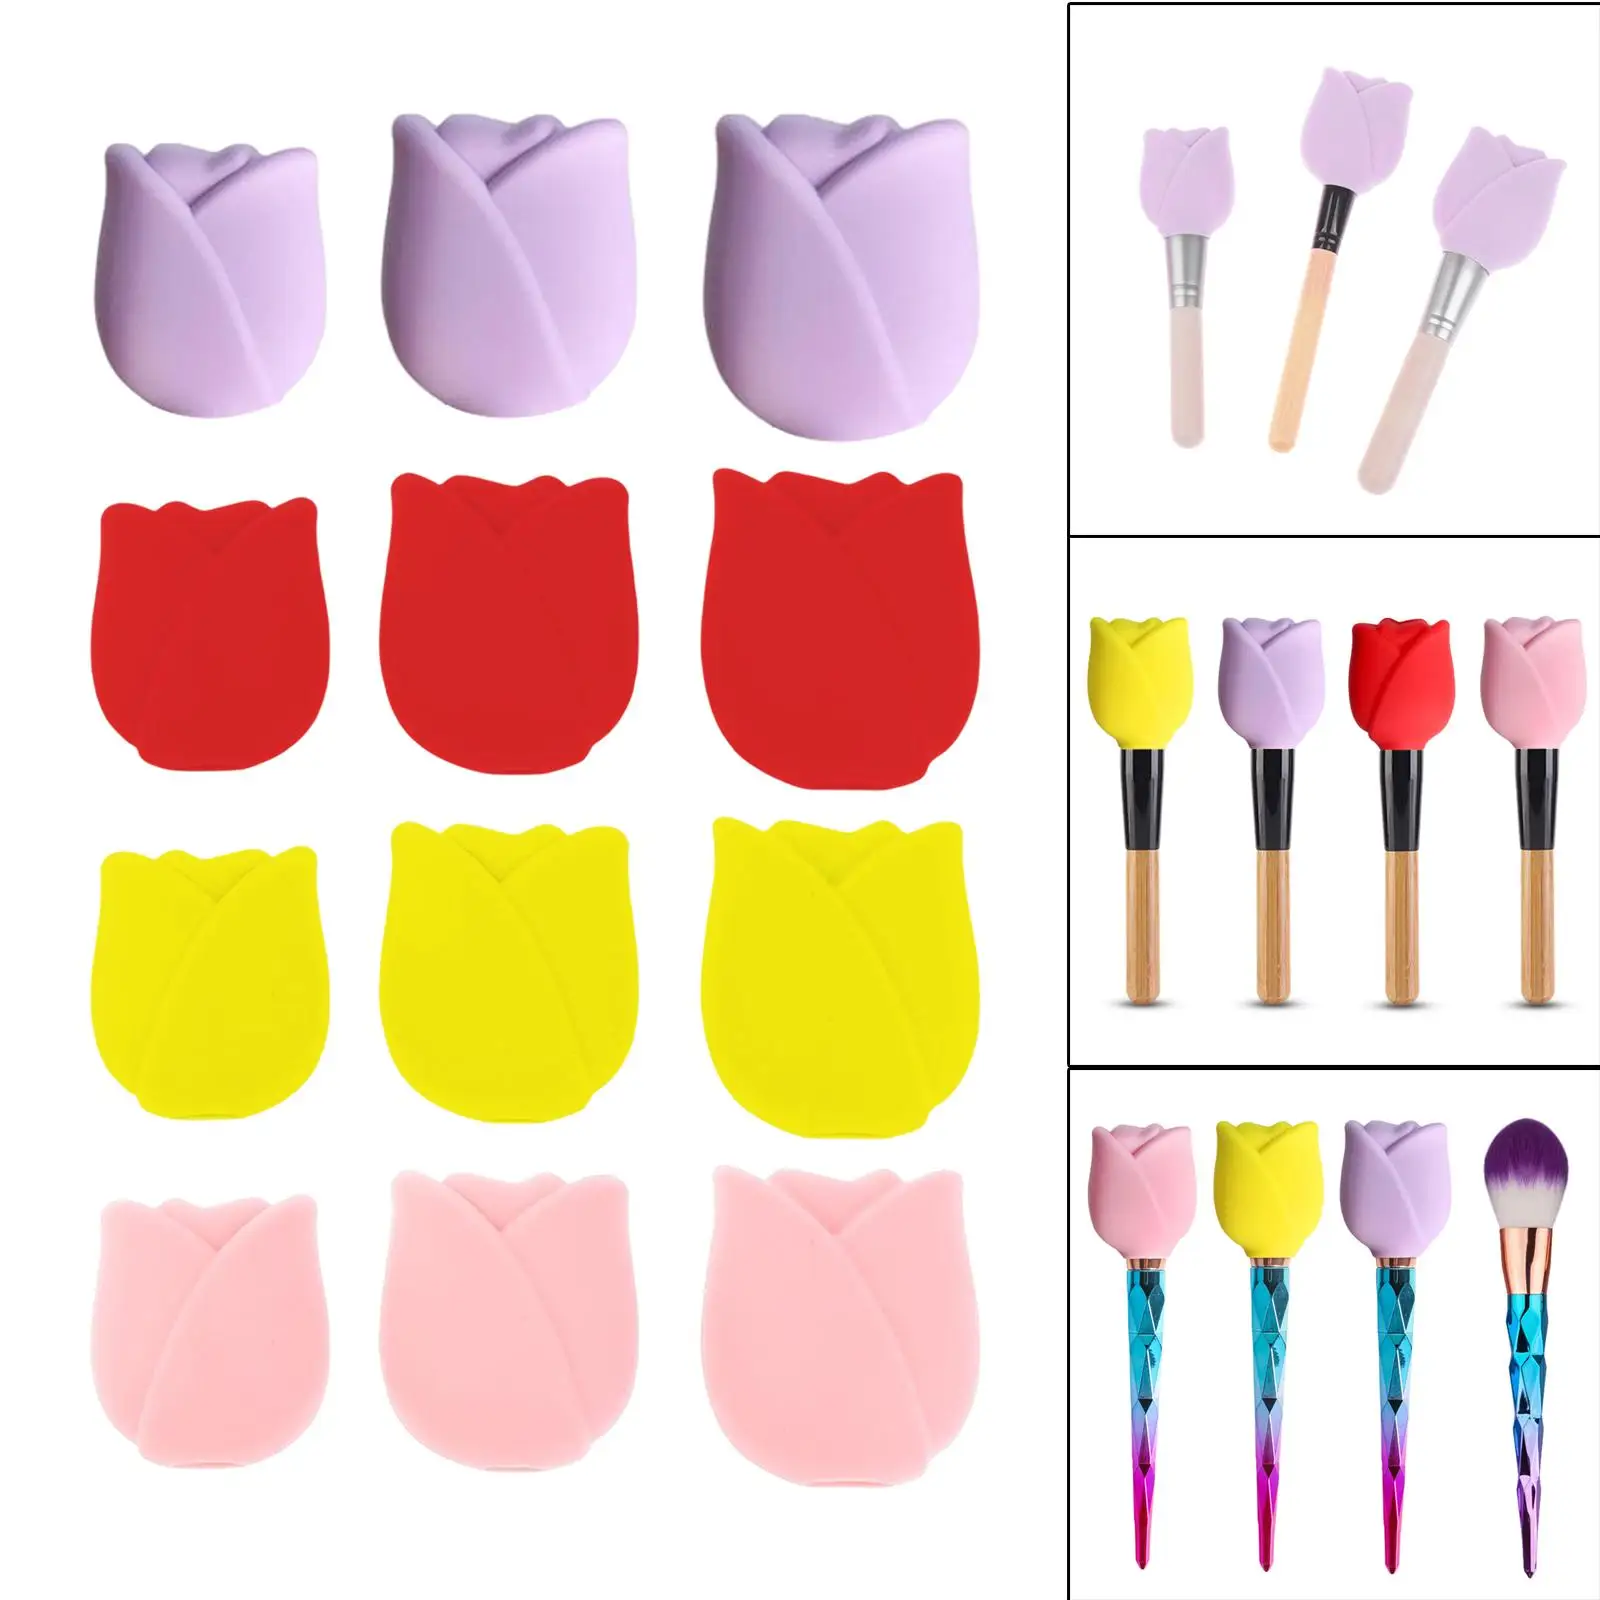 3x Professional Silicone Makeup Brush Cover Easy to Clean Storage Box Holder for Women